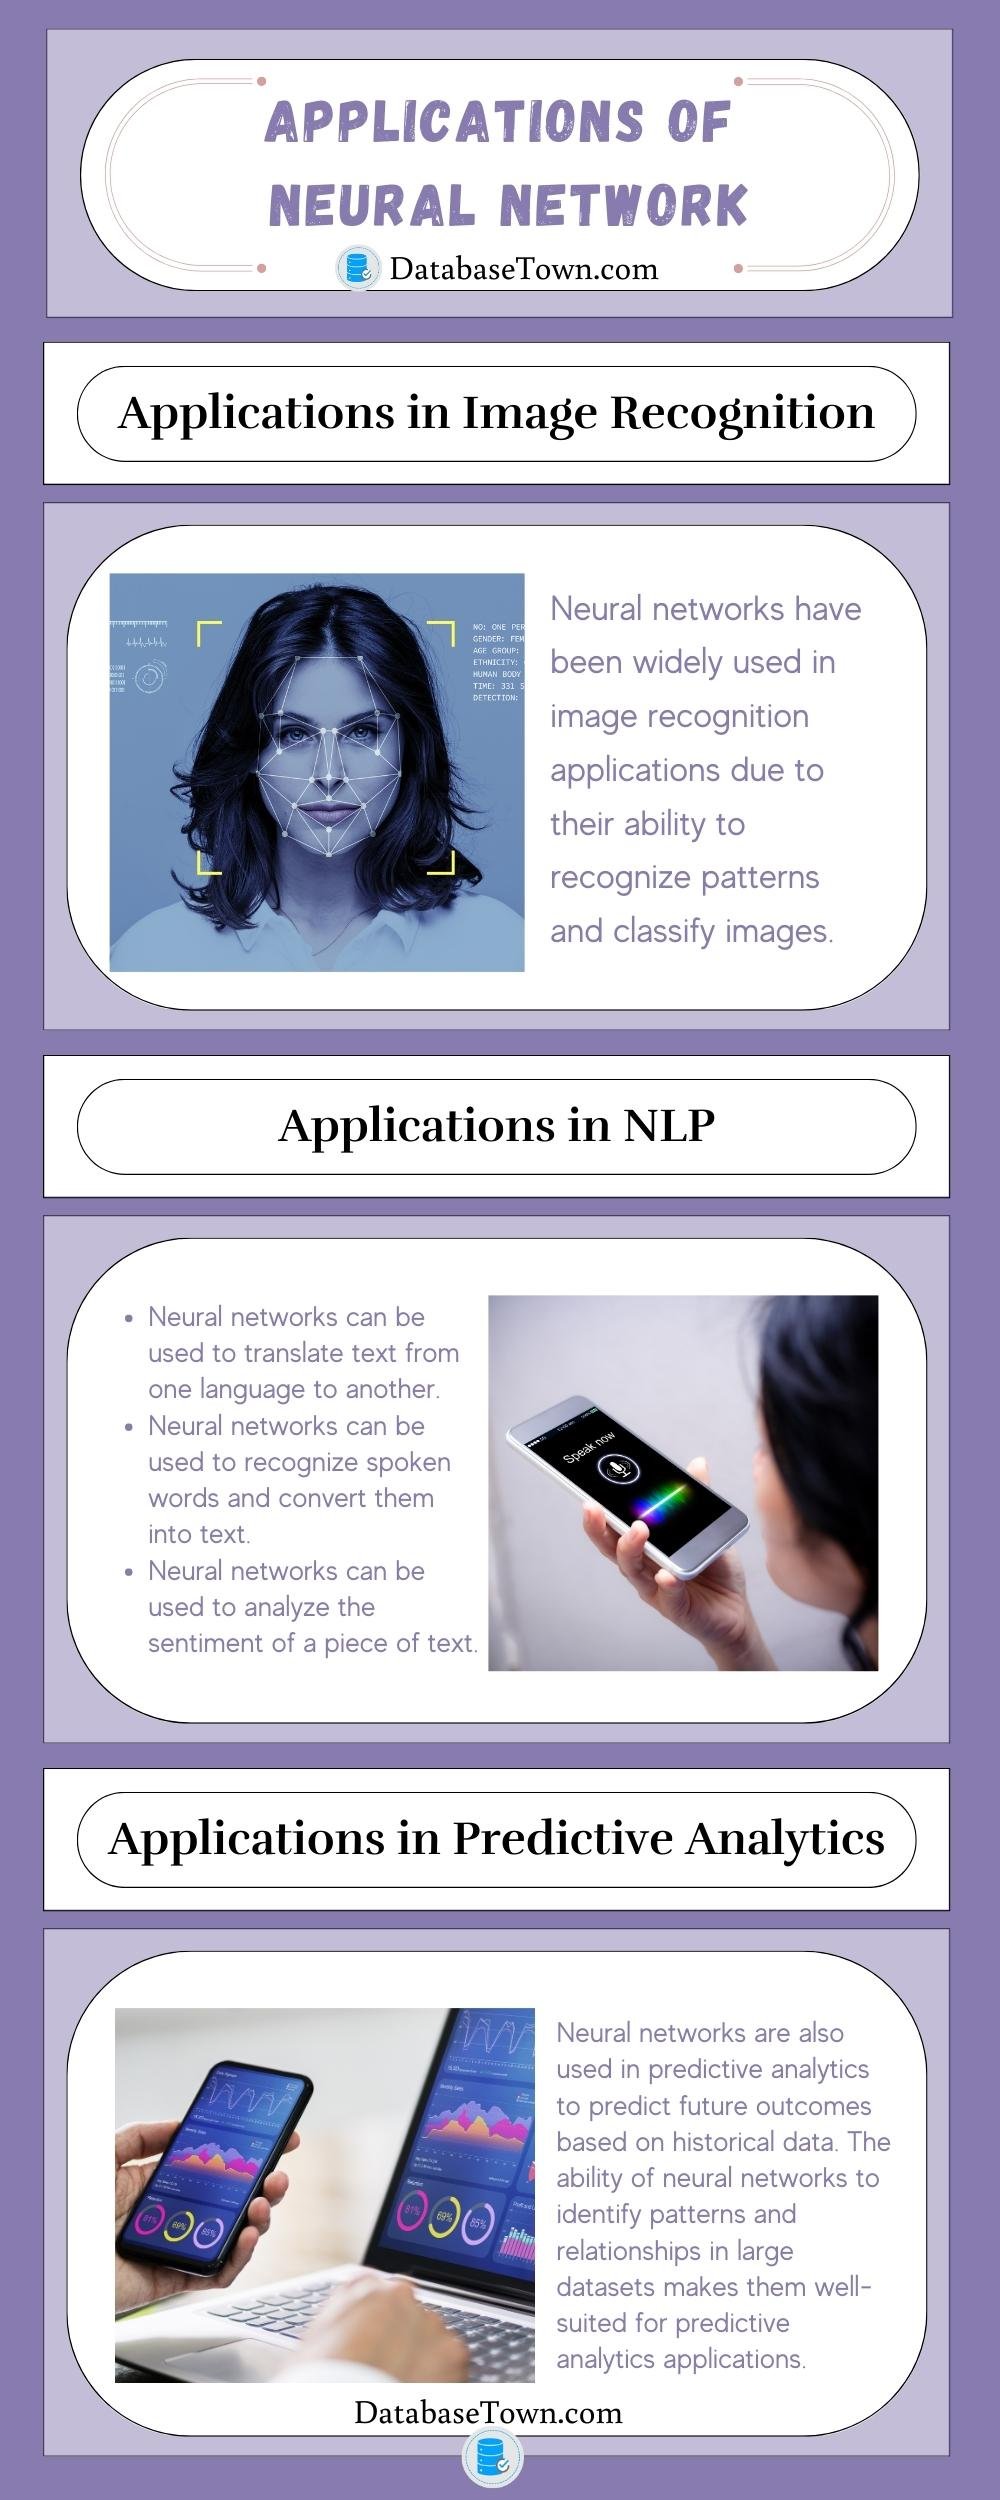 Application of Neural Network in Image Recognition, NLP & Predictive Analysis